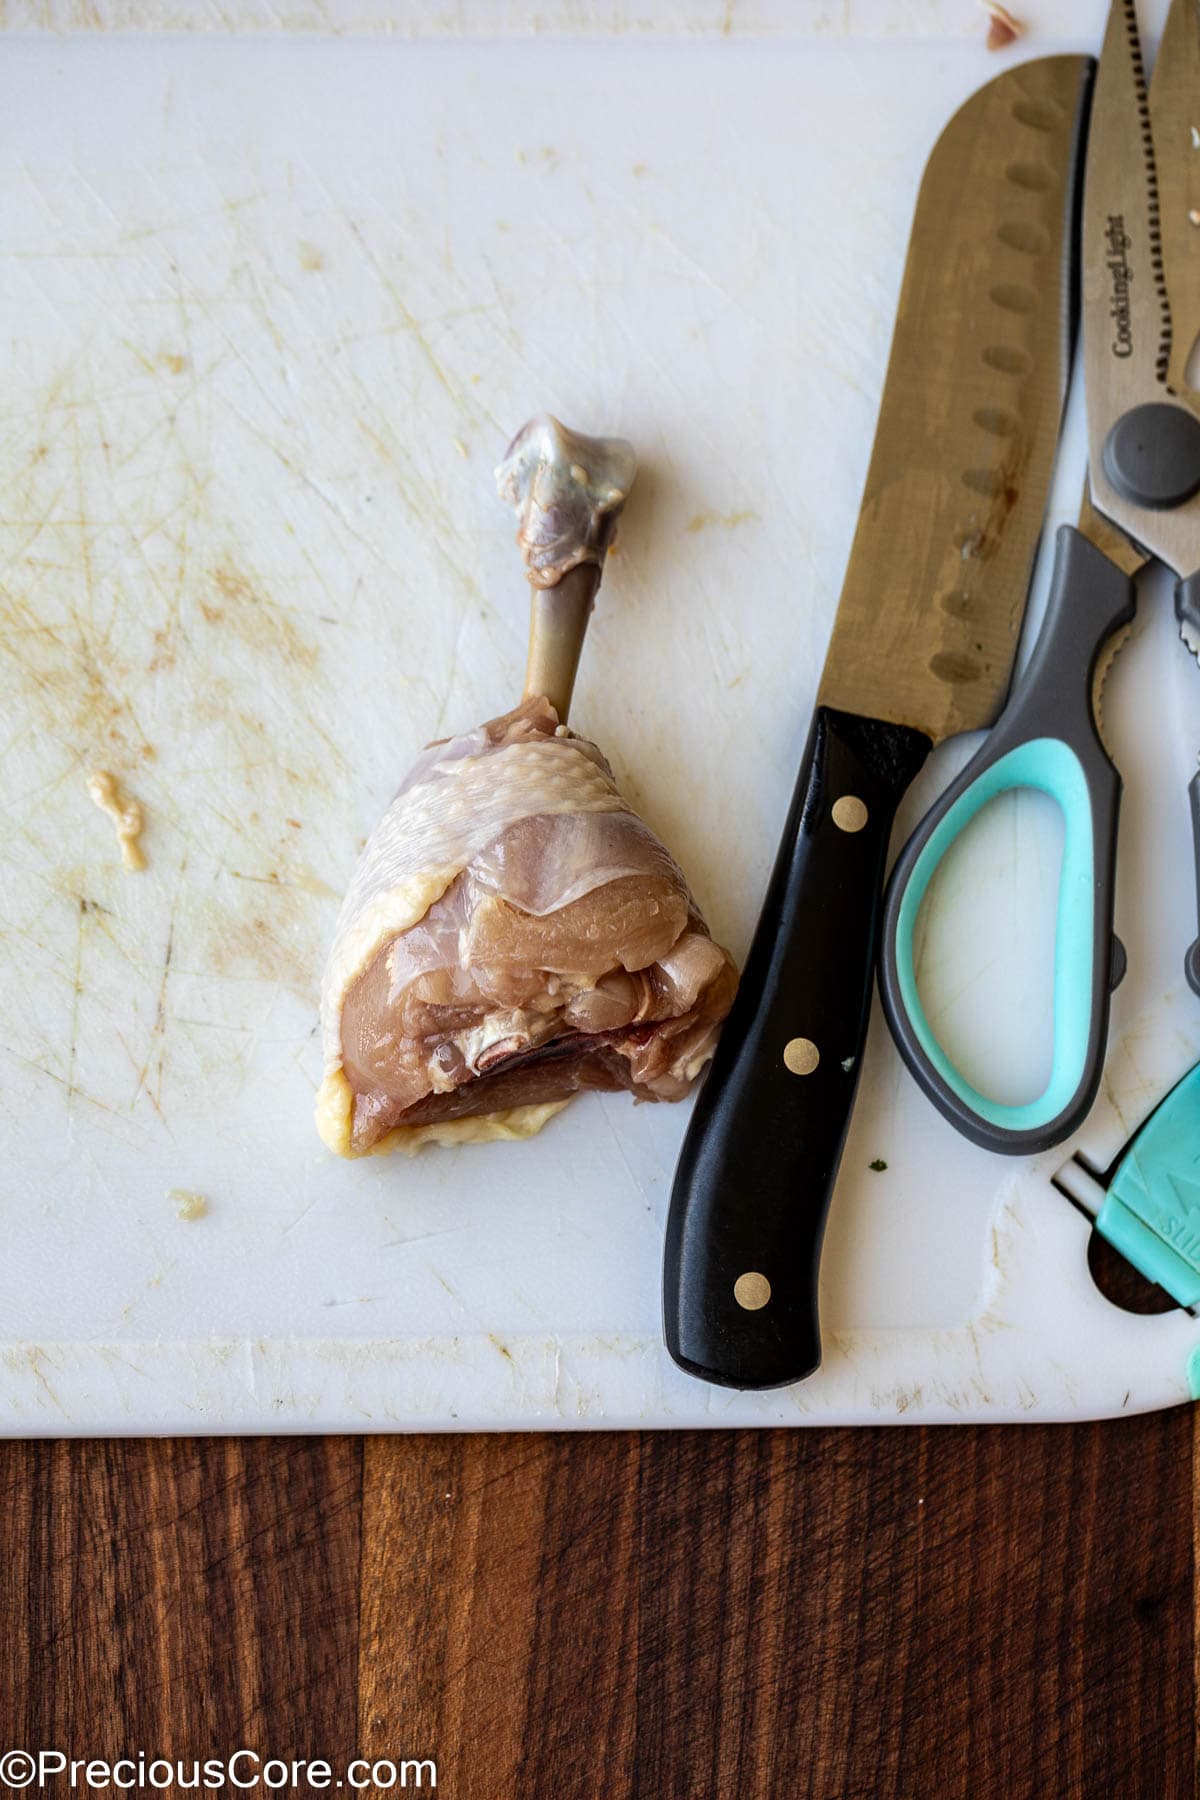 Knife, kitchen shears, and a chicken drumstick.